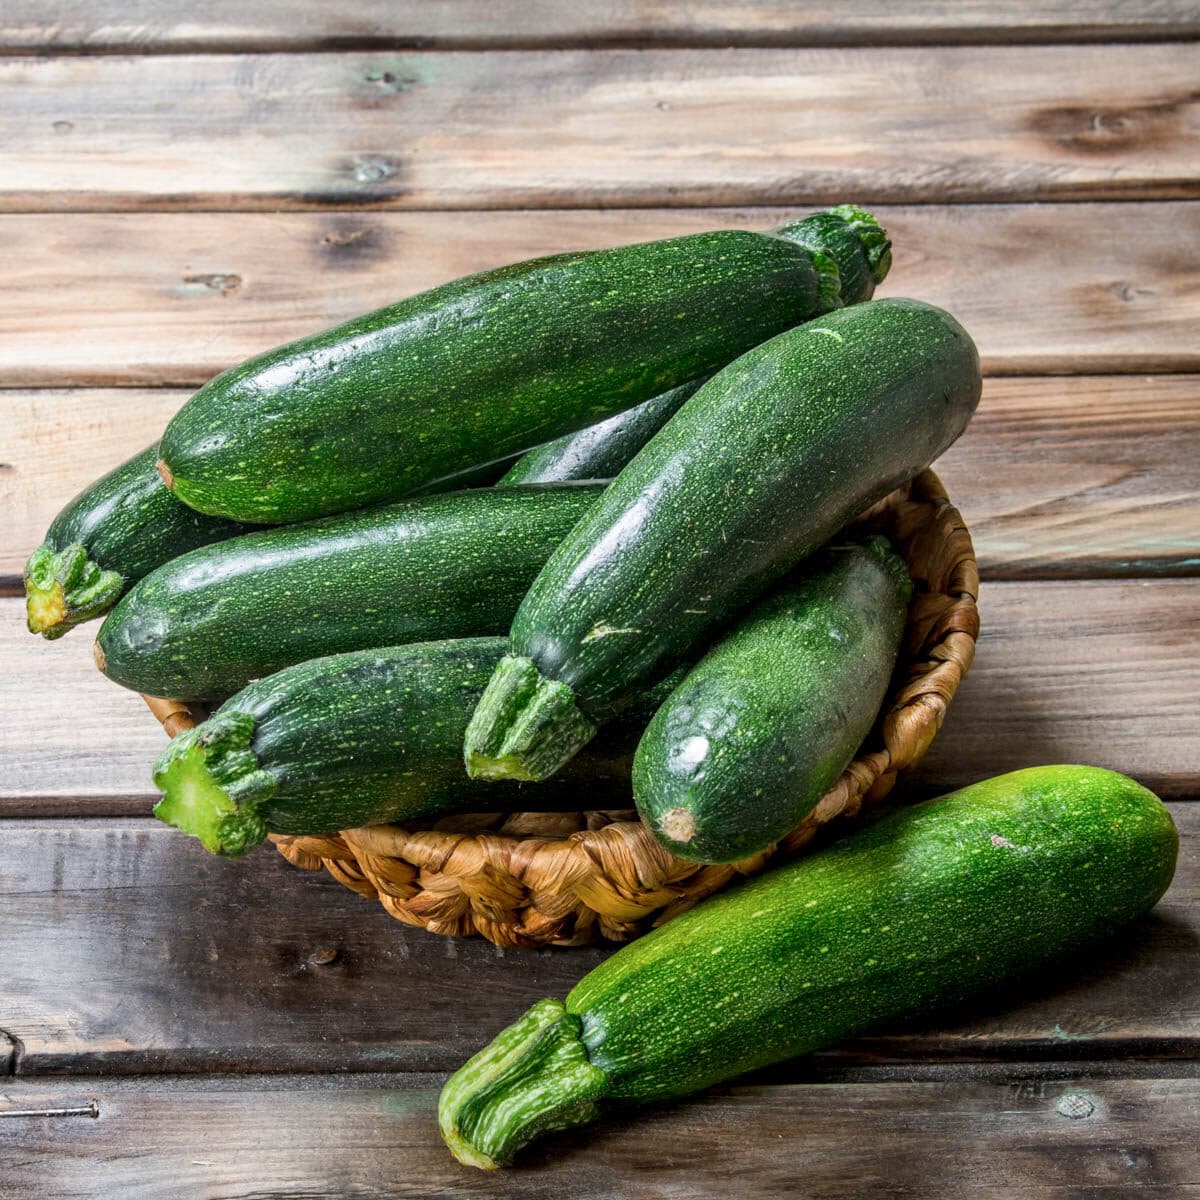 A small basket with fresh zucchini